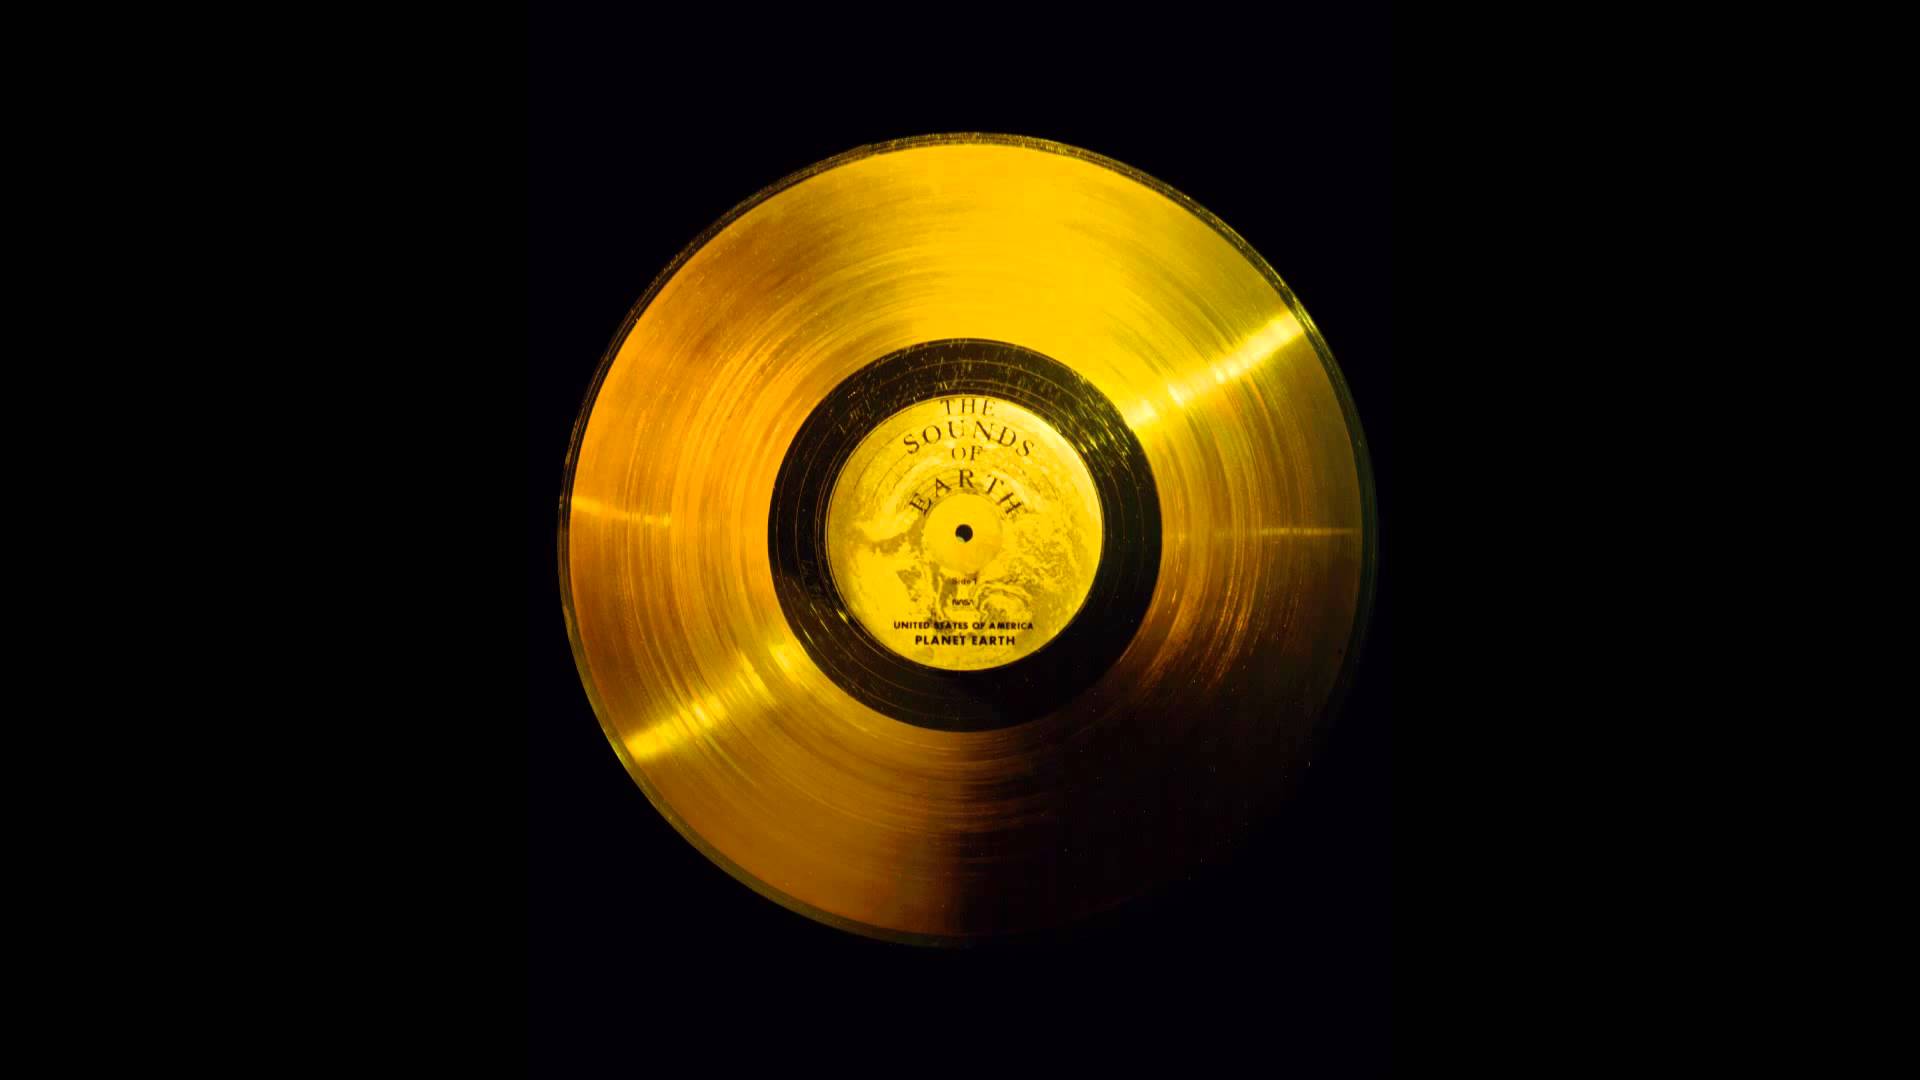 voyager 1 records